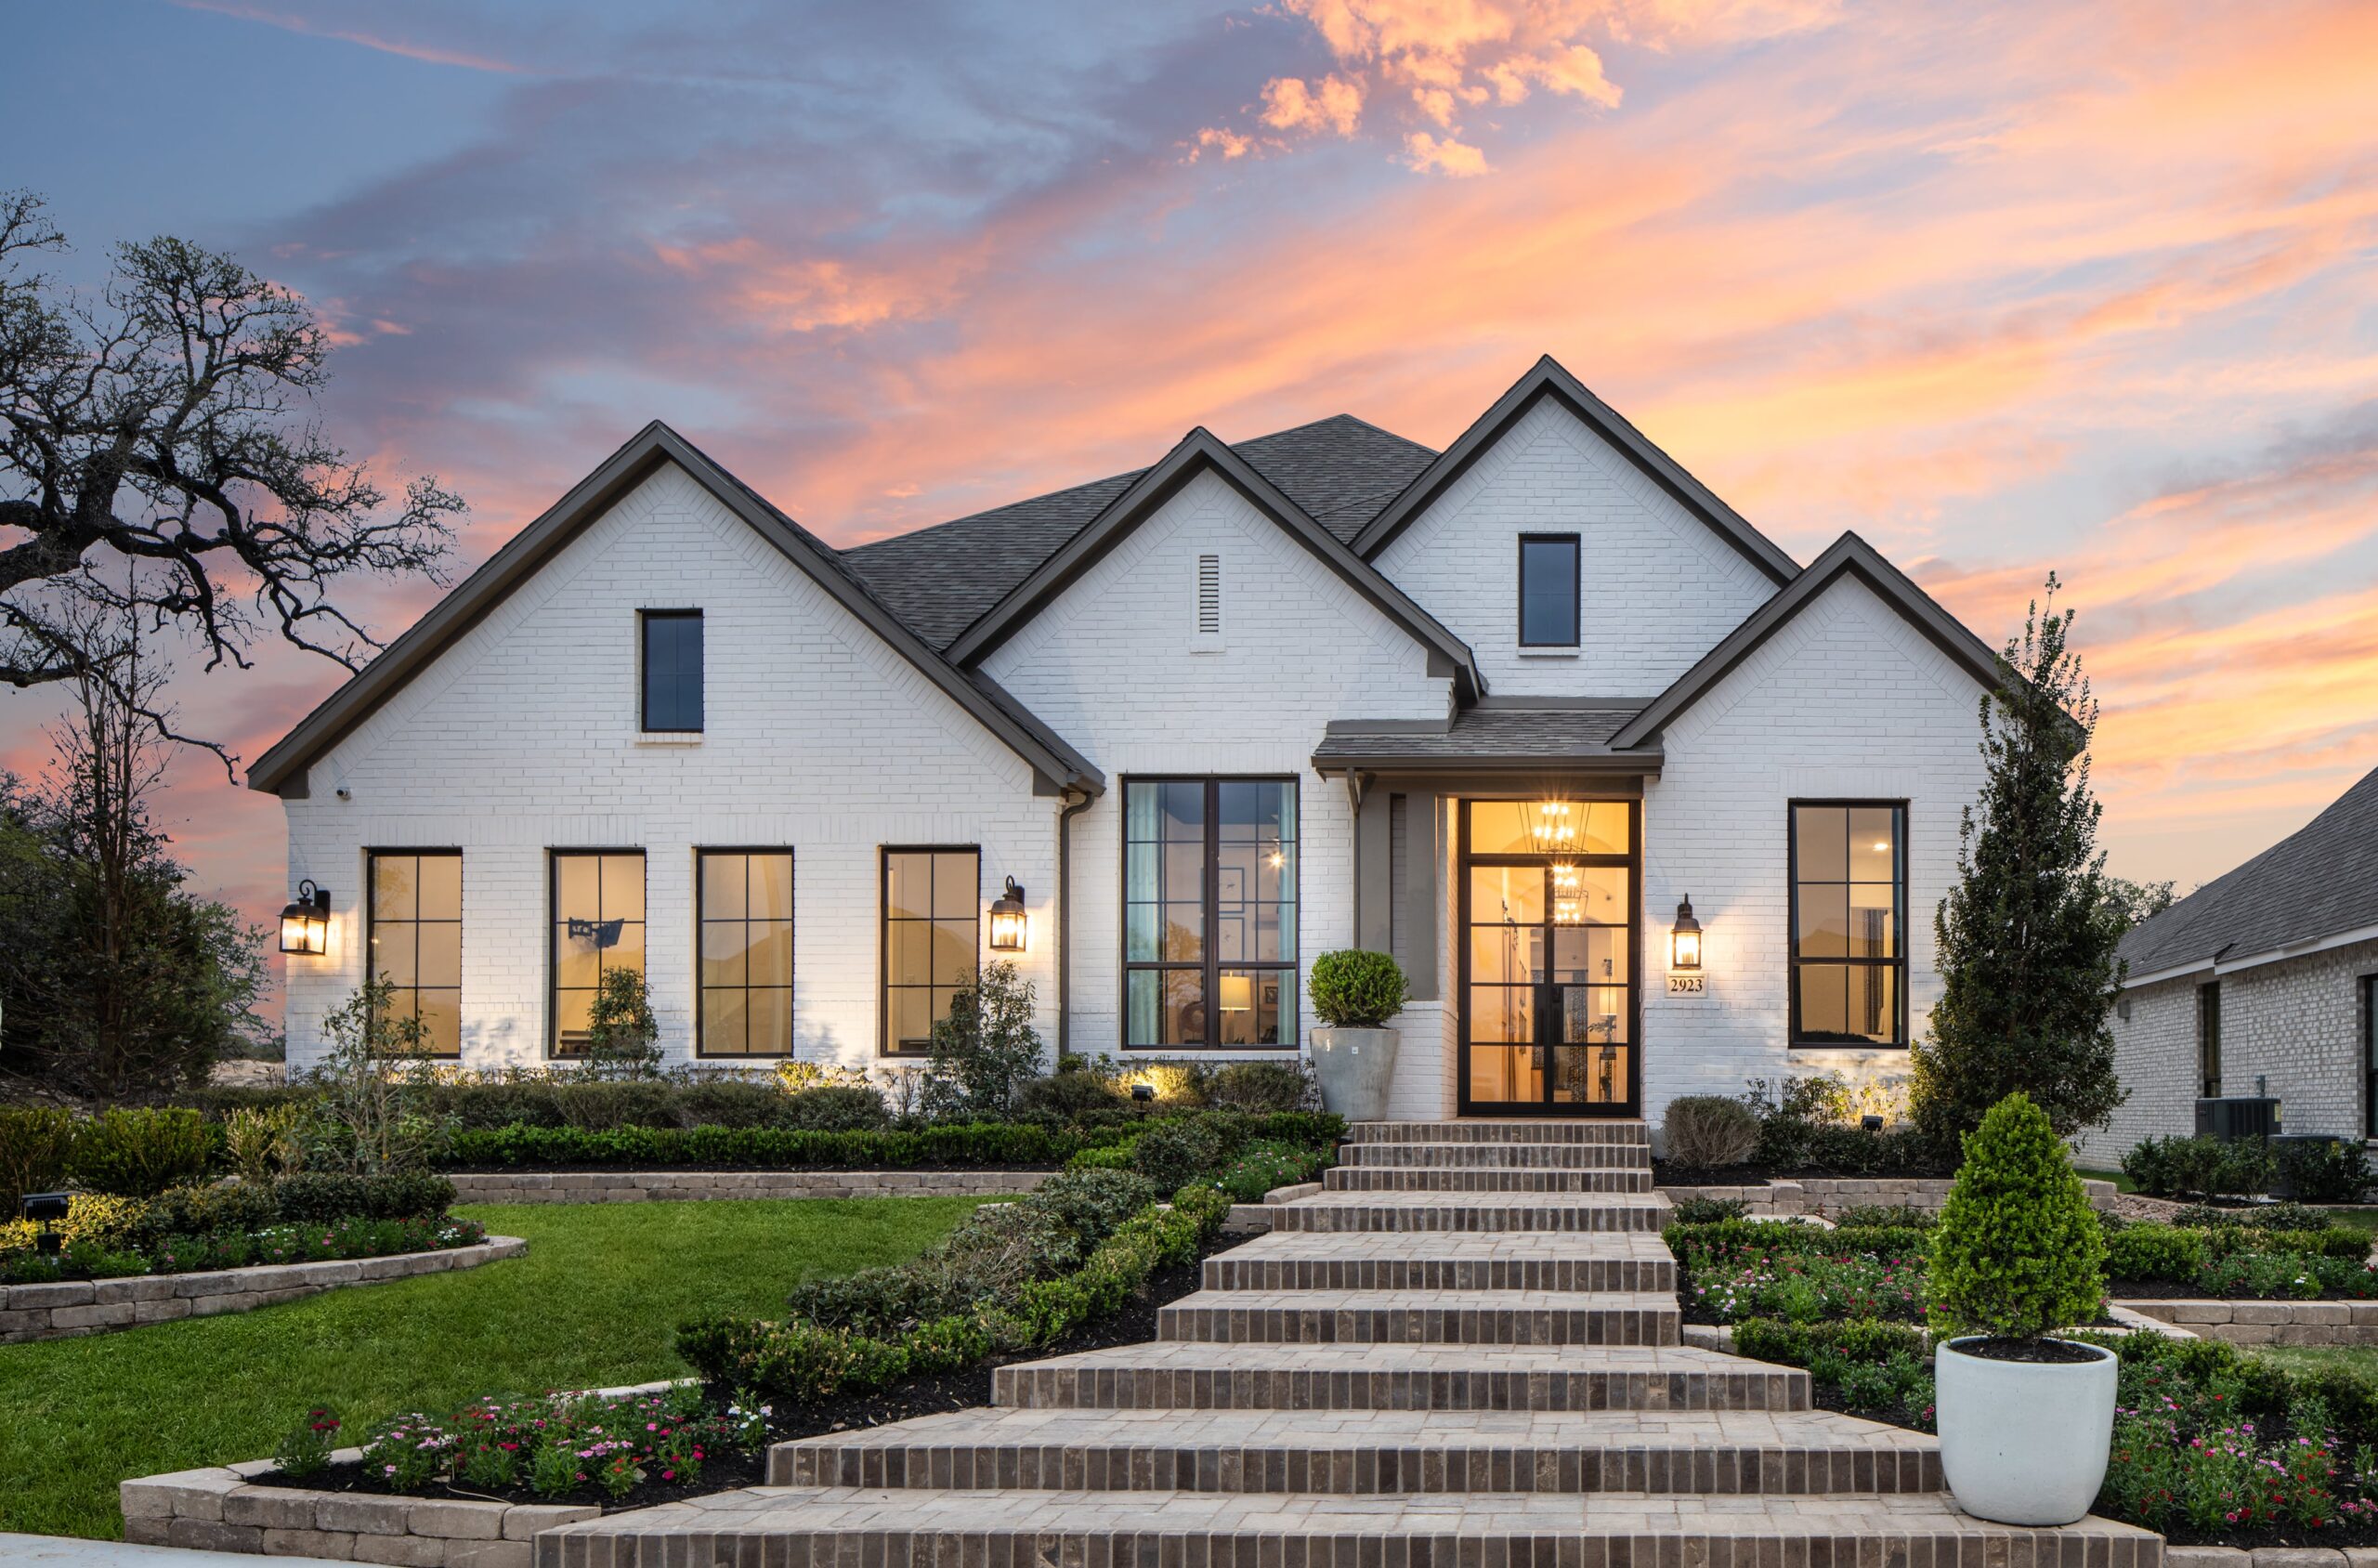 Exterior shot of custom home at sunset with manicured lawn and classic white paint